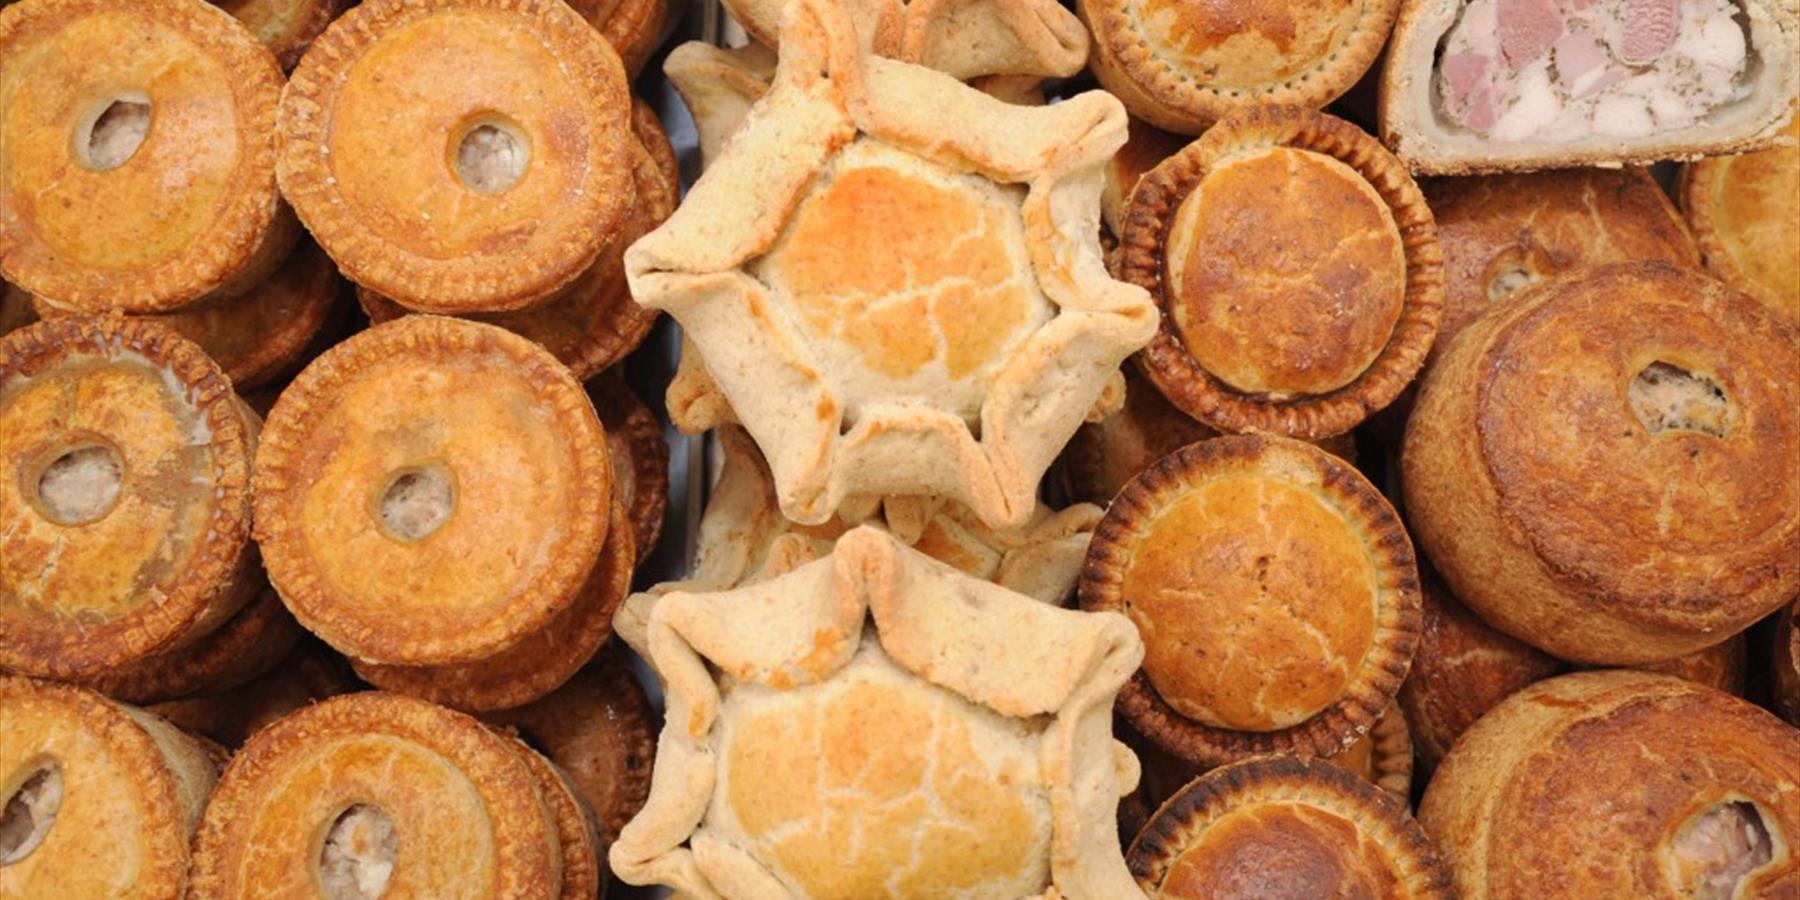 A selection of pies